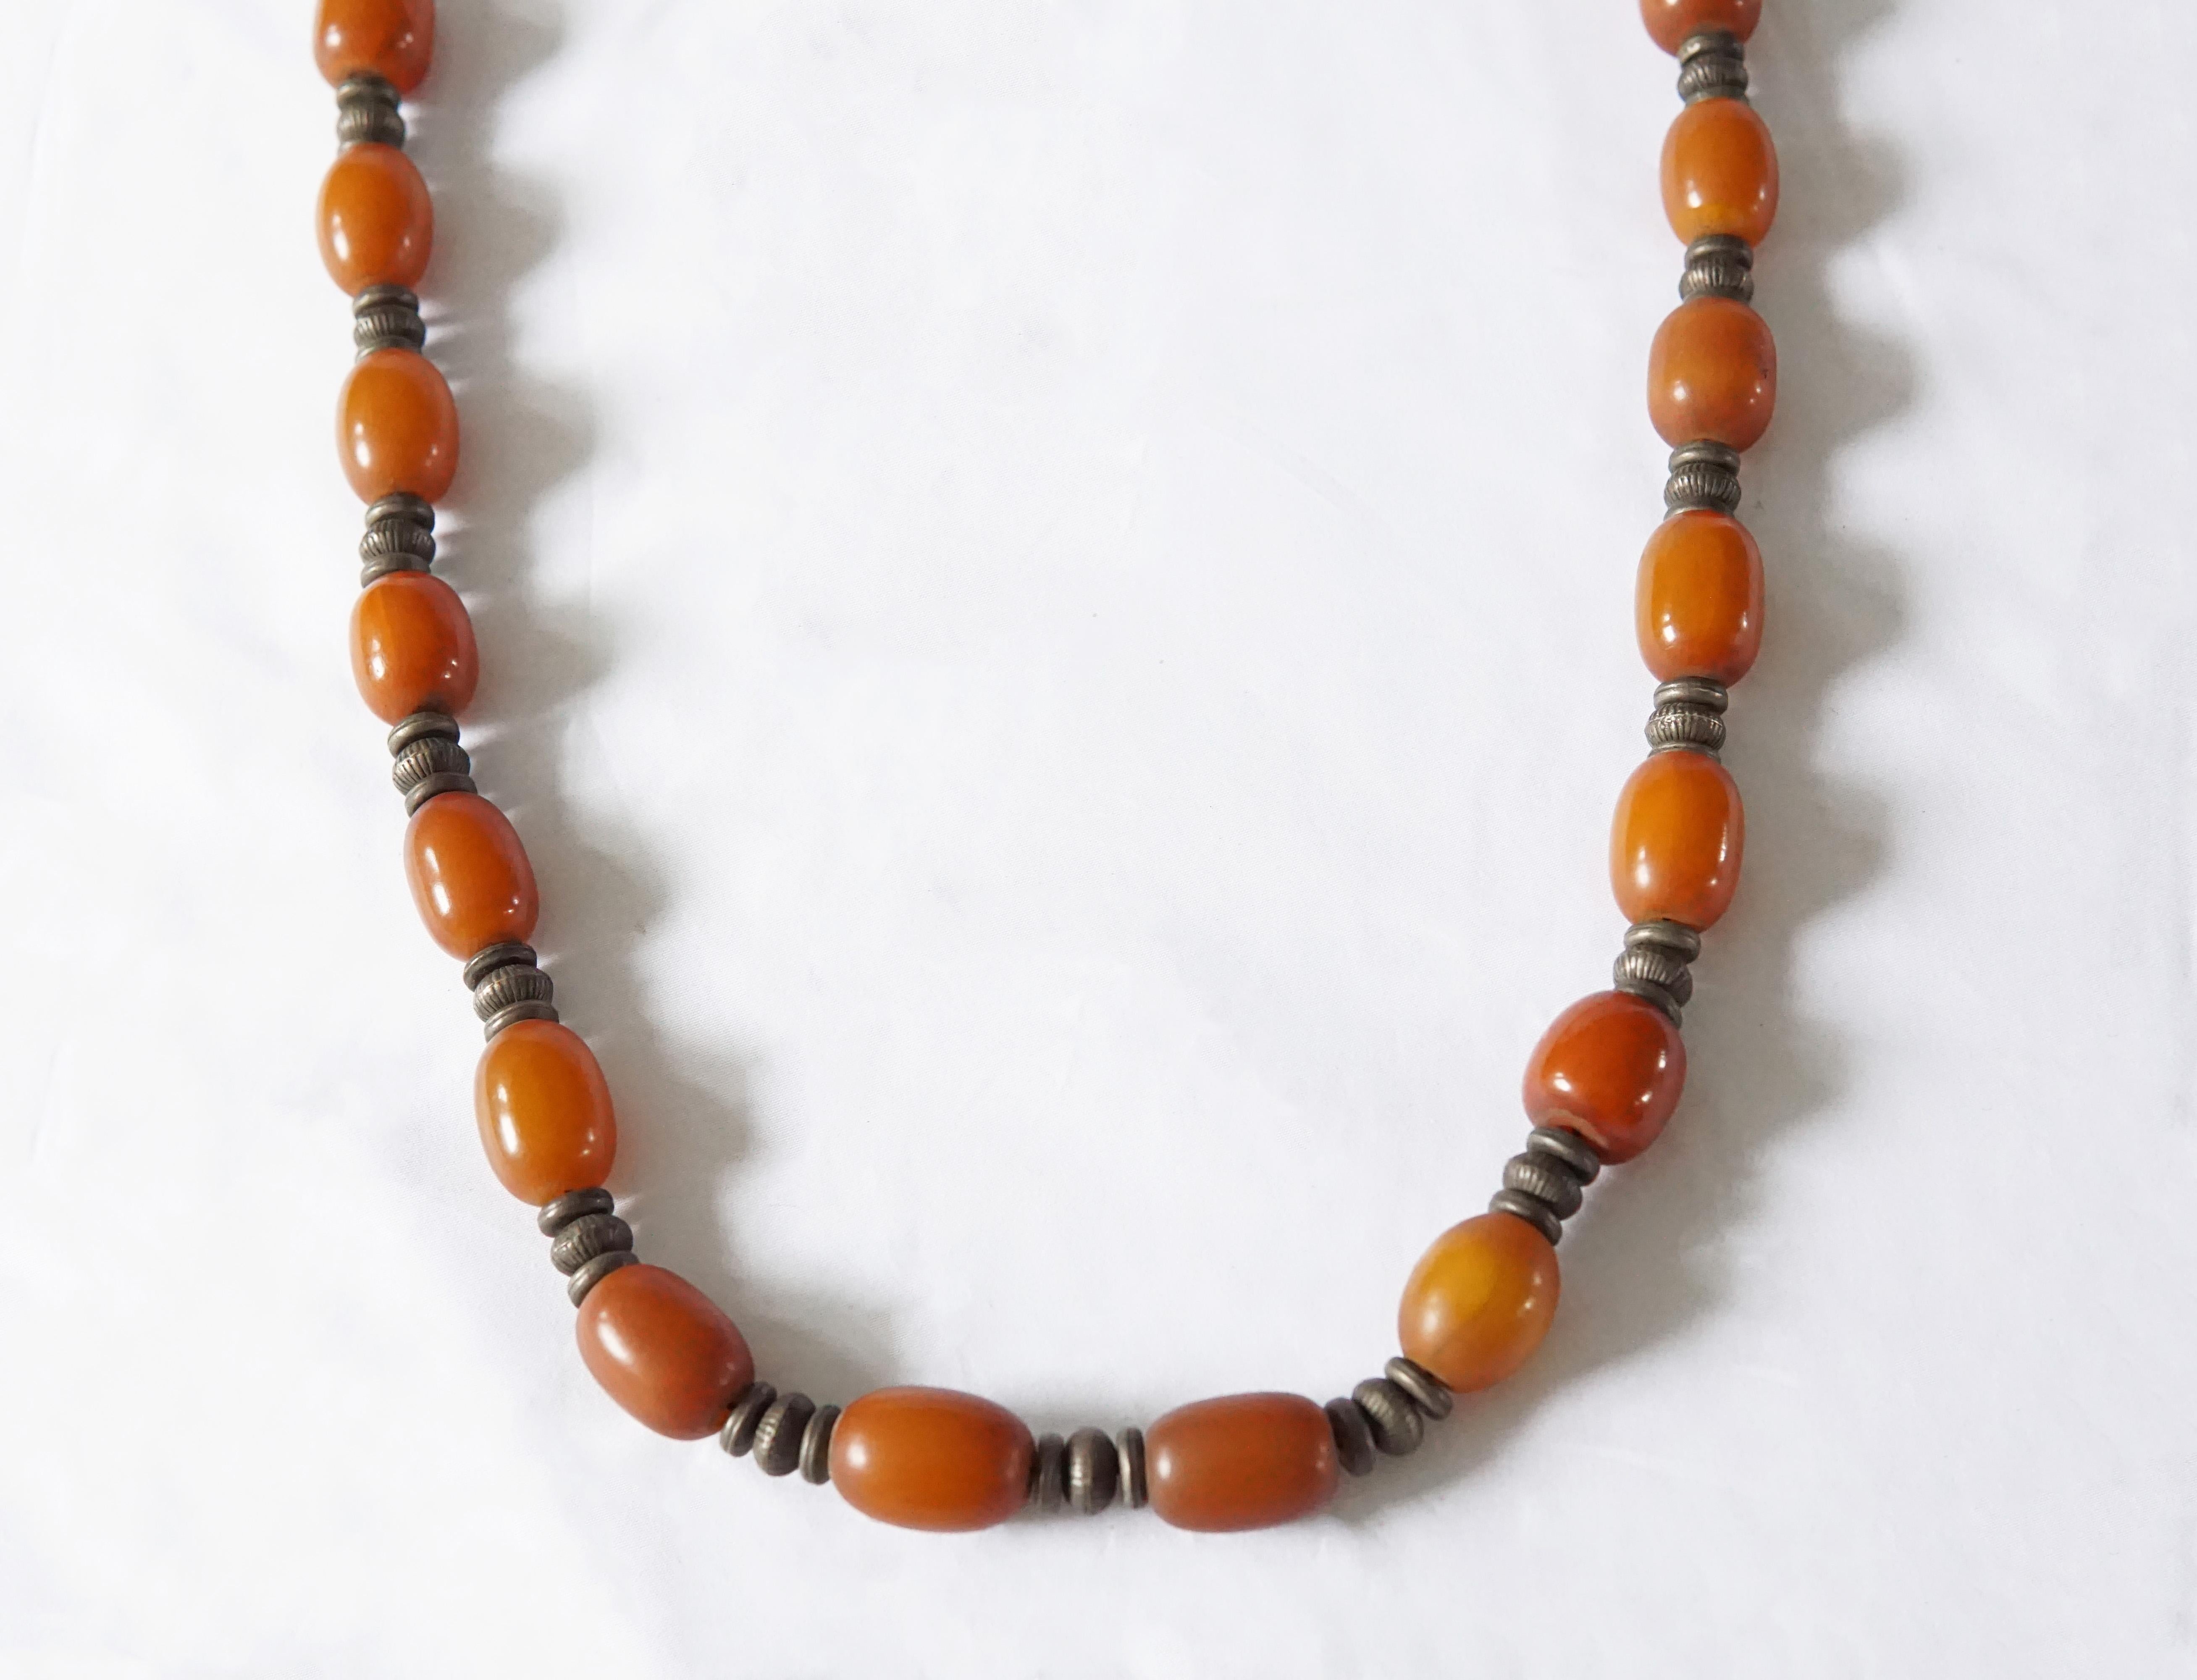 A long vintage necklace hand-crafted from West African orange Copal Amber beads with Silver spacers.

Dimensions: drop length 47 cm x depth 1.5 cm width 3 cm
Weight; 90 grams
Bead size: length 2 cm x depth 1.5 cm.

